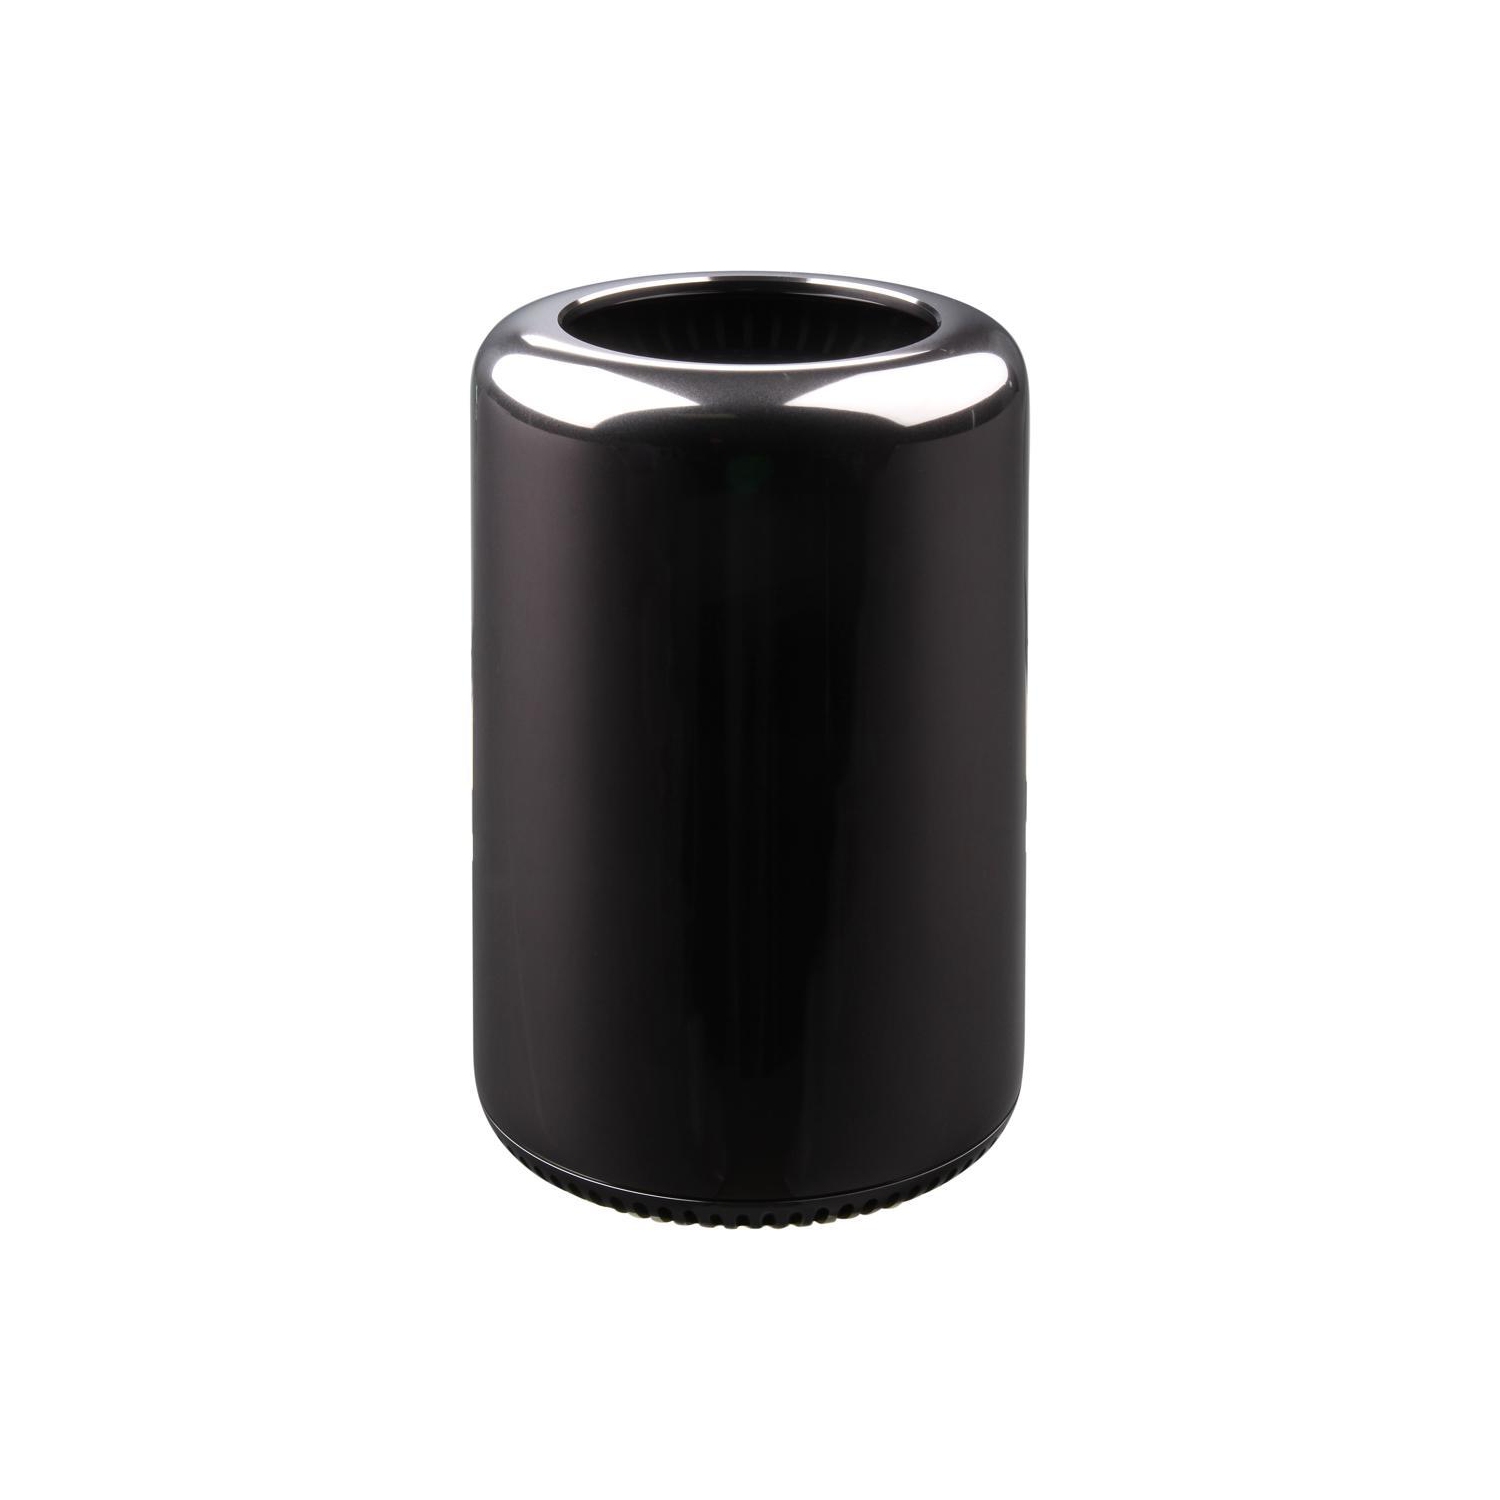 Refurbished (Excellent) - Apple Mac Pro Late 2013 MD878LL/A Desktop Computer 3.5Ghz 6-Core 16GB 256GB SSD Refurbished Grade A+ 10/10 Condition